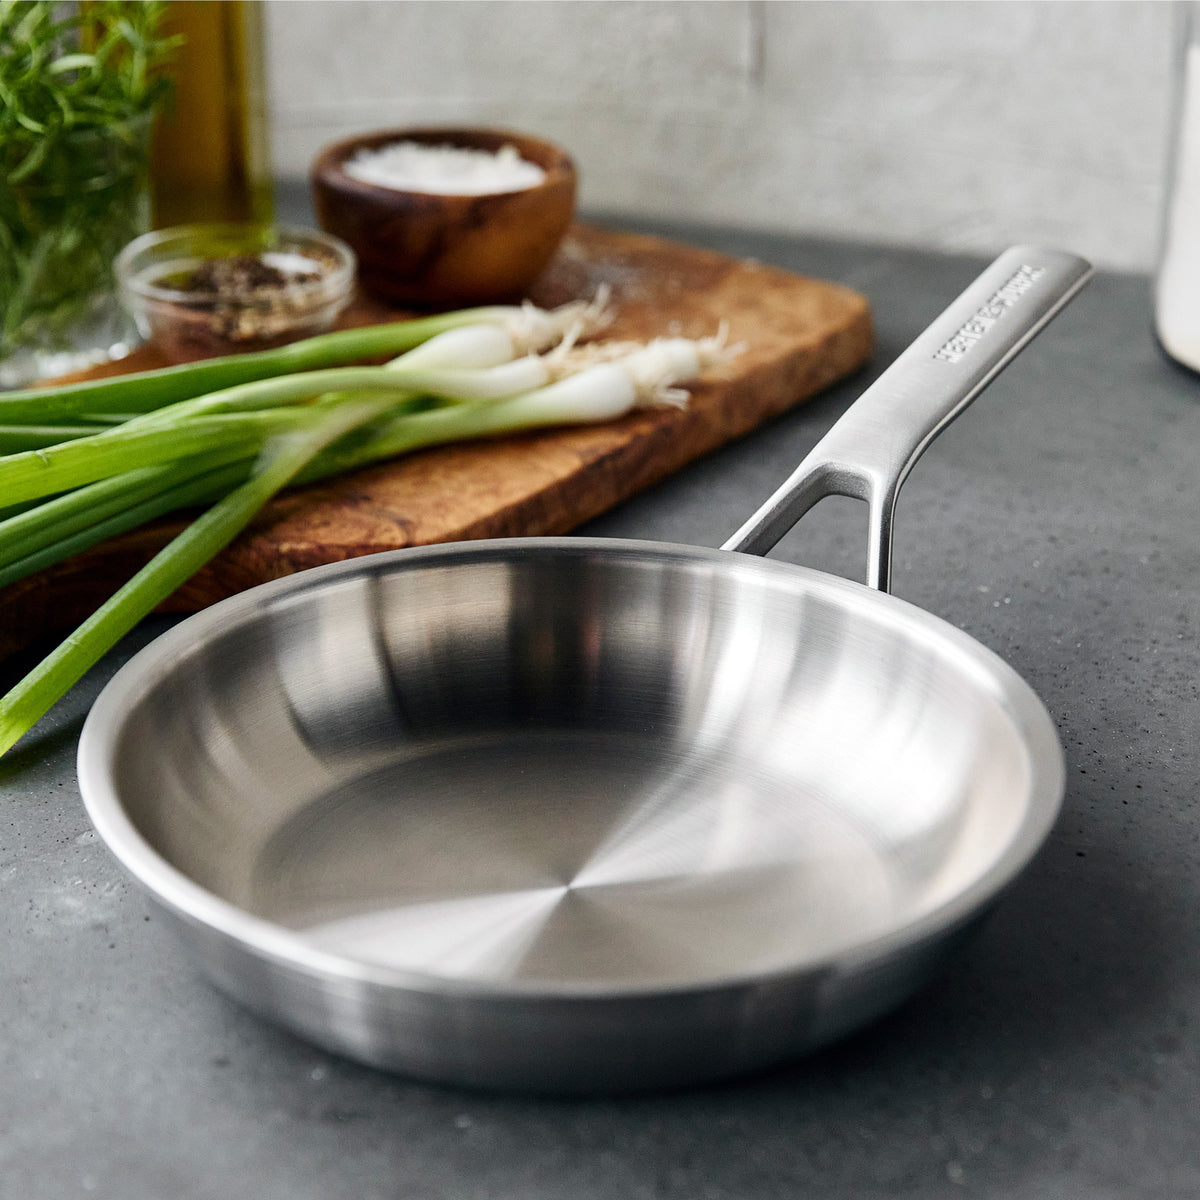 8 inch frypan set on a stone counter with a cutting board, green onions and spices behind it.